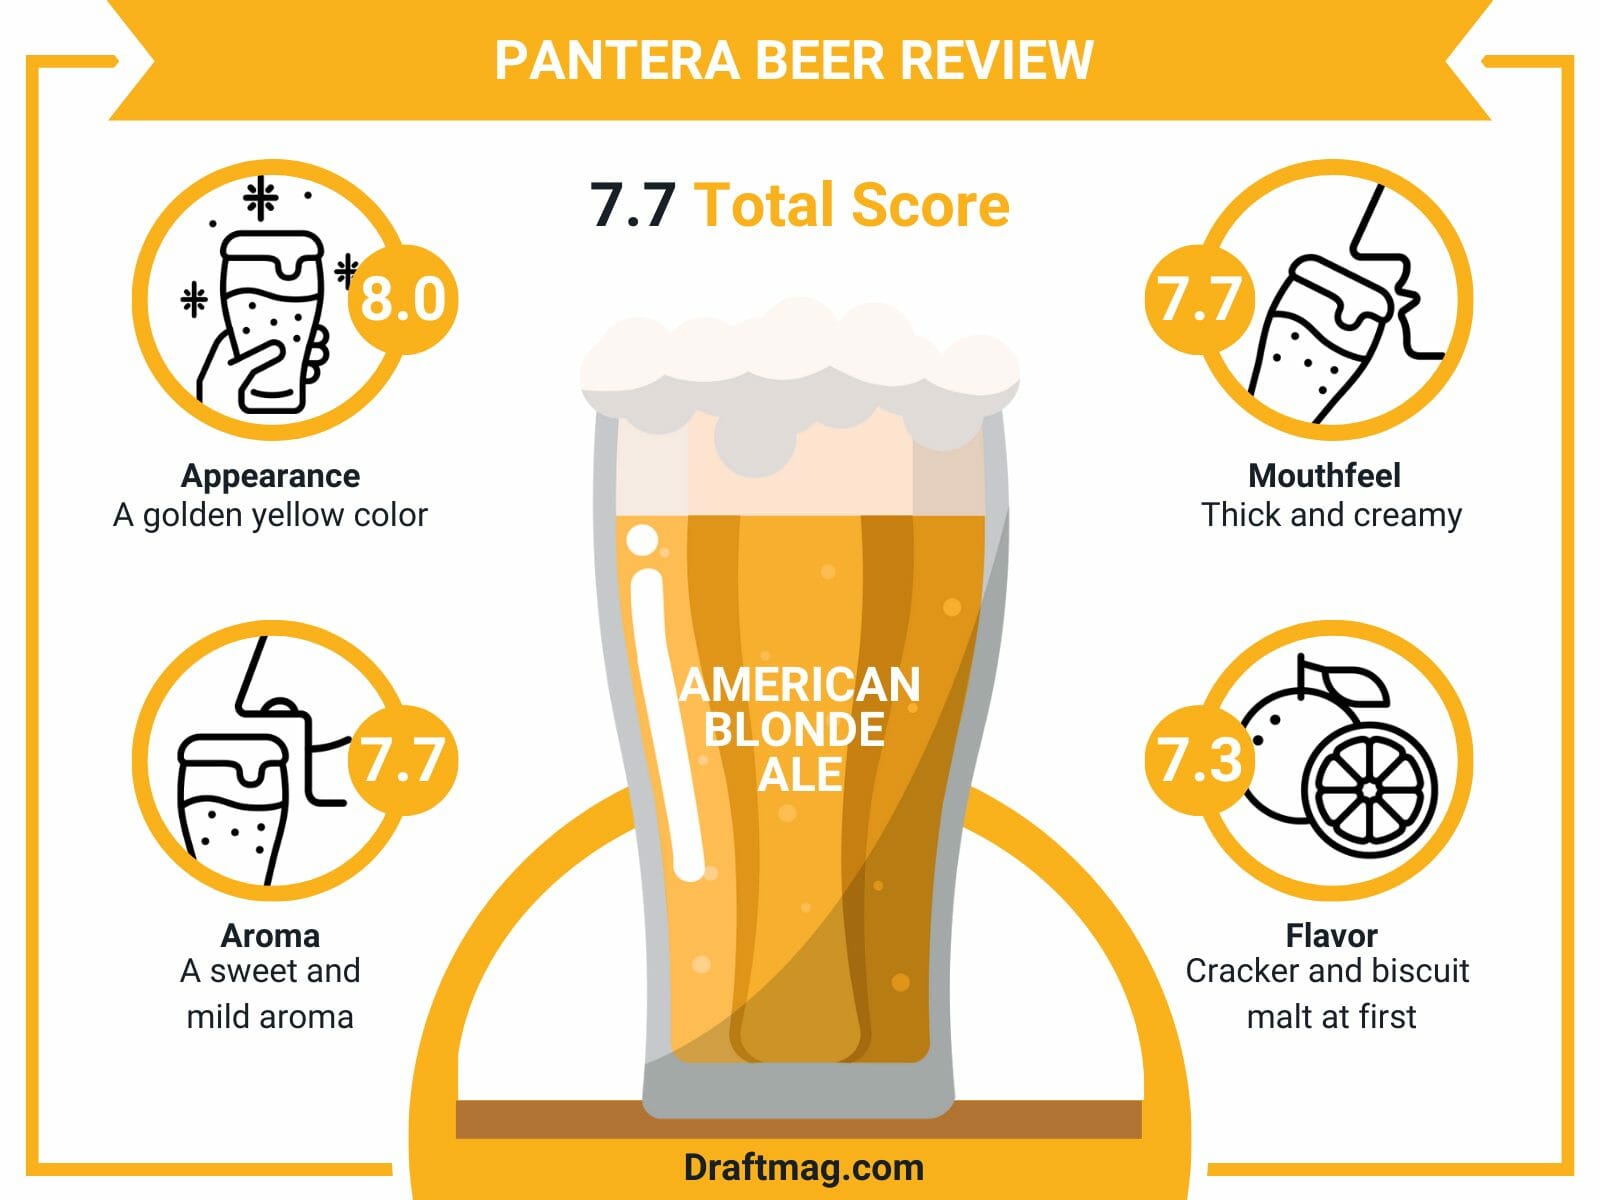 Pantera beer review infographic